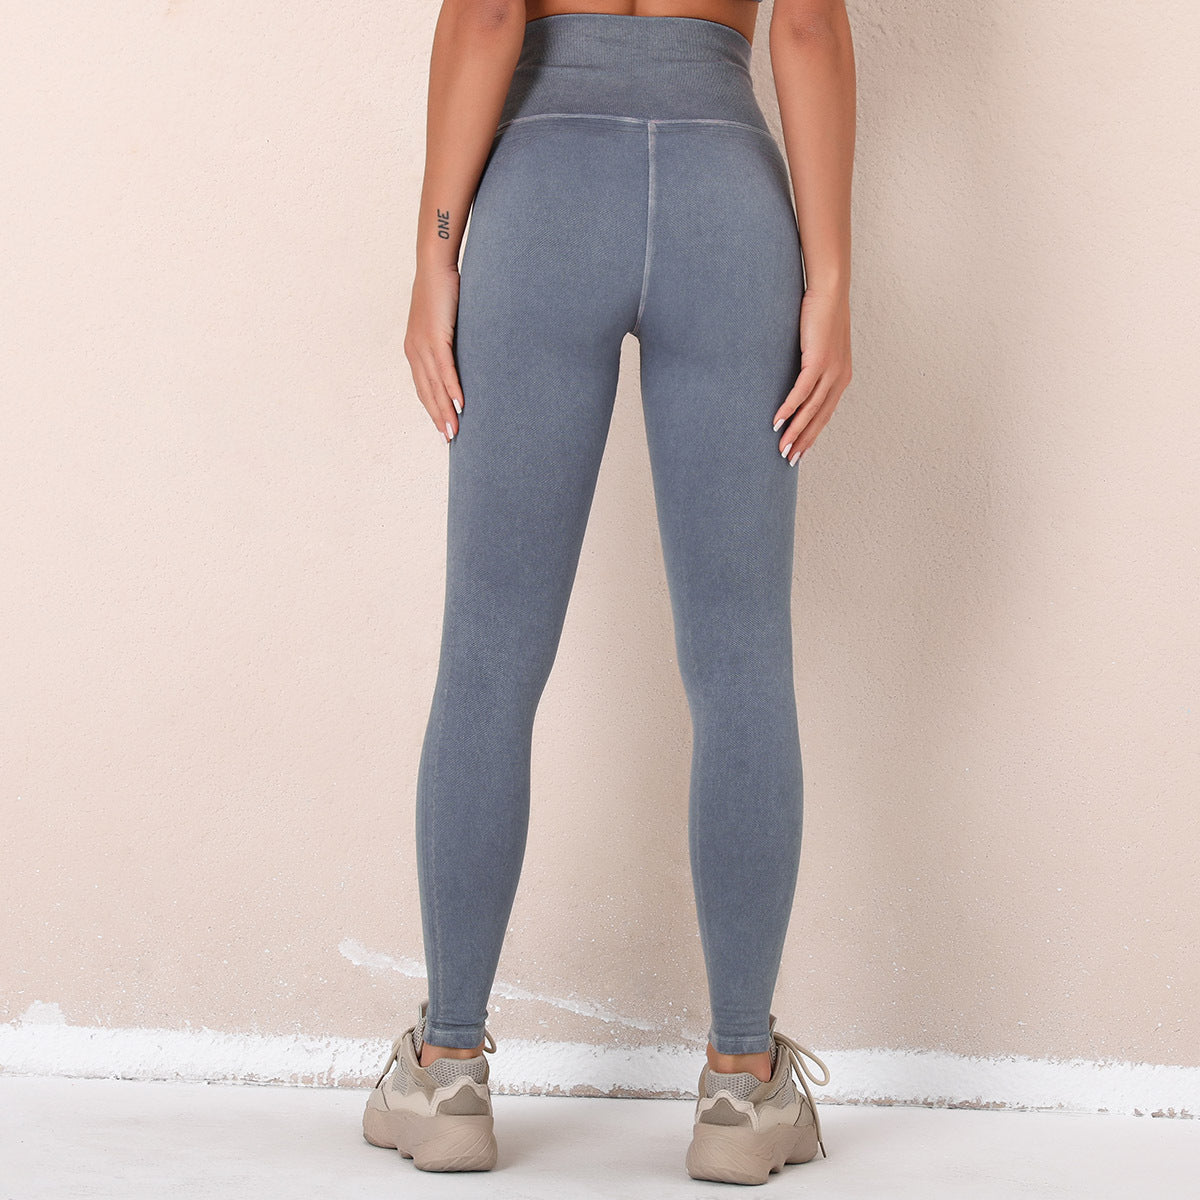 High waisted ripped active pants